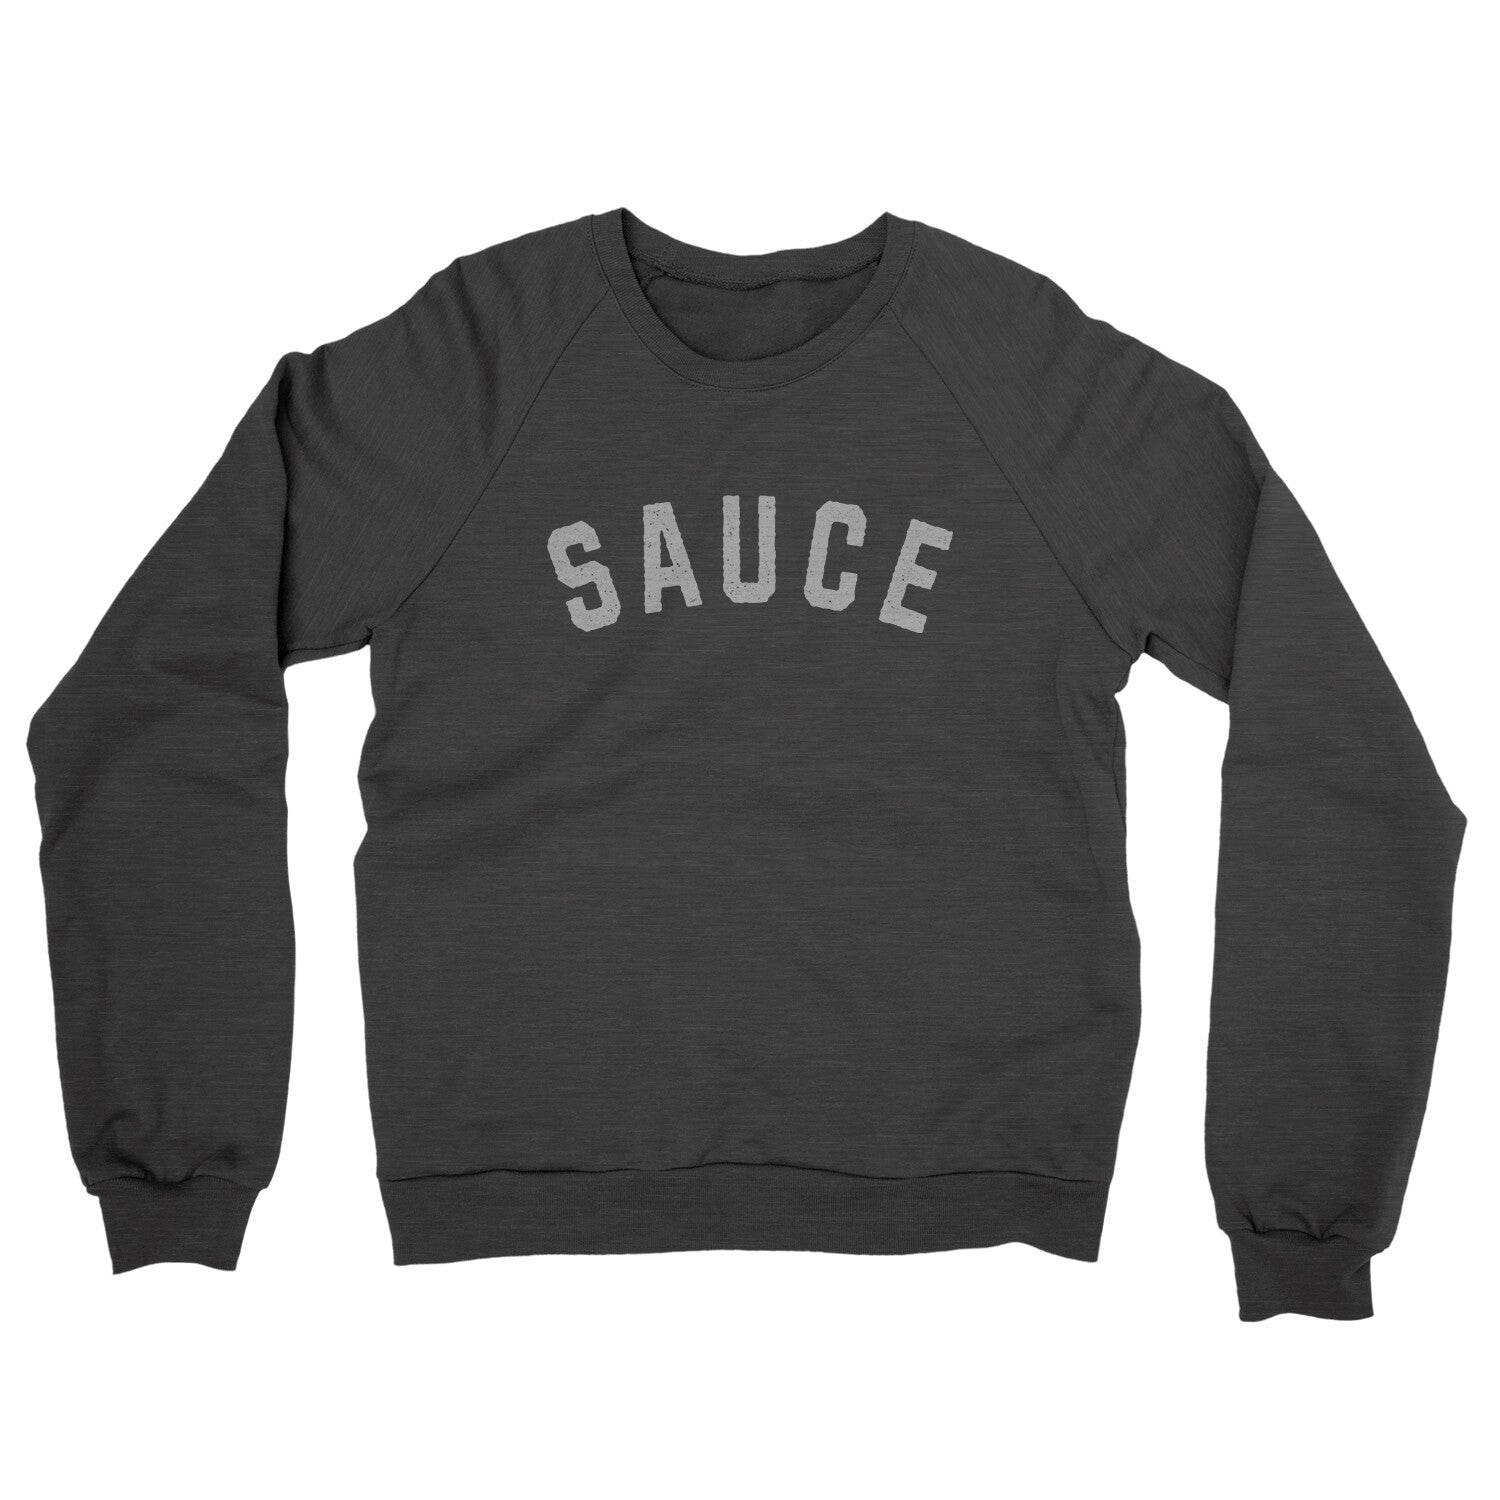 Sauce in Charcoal Heather Color